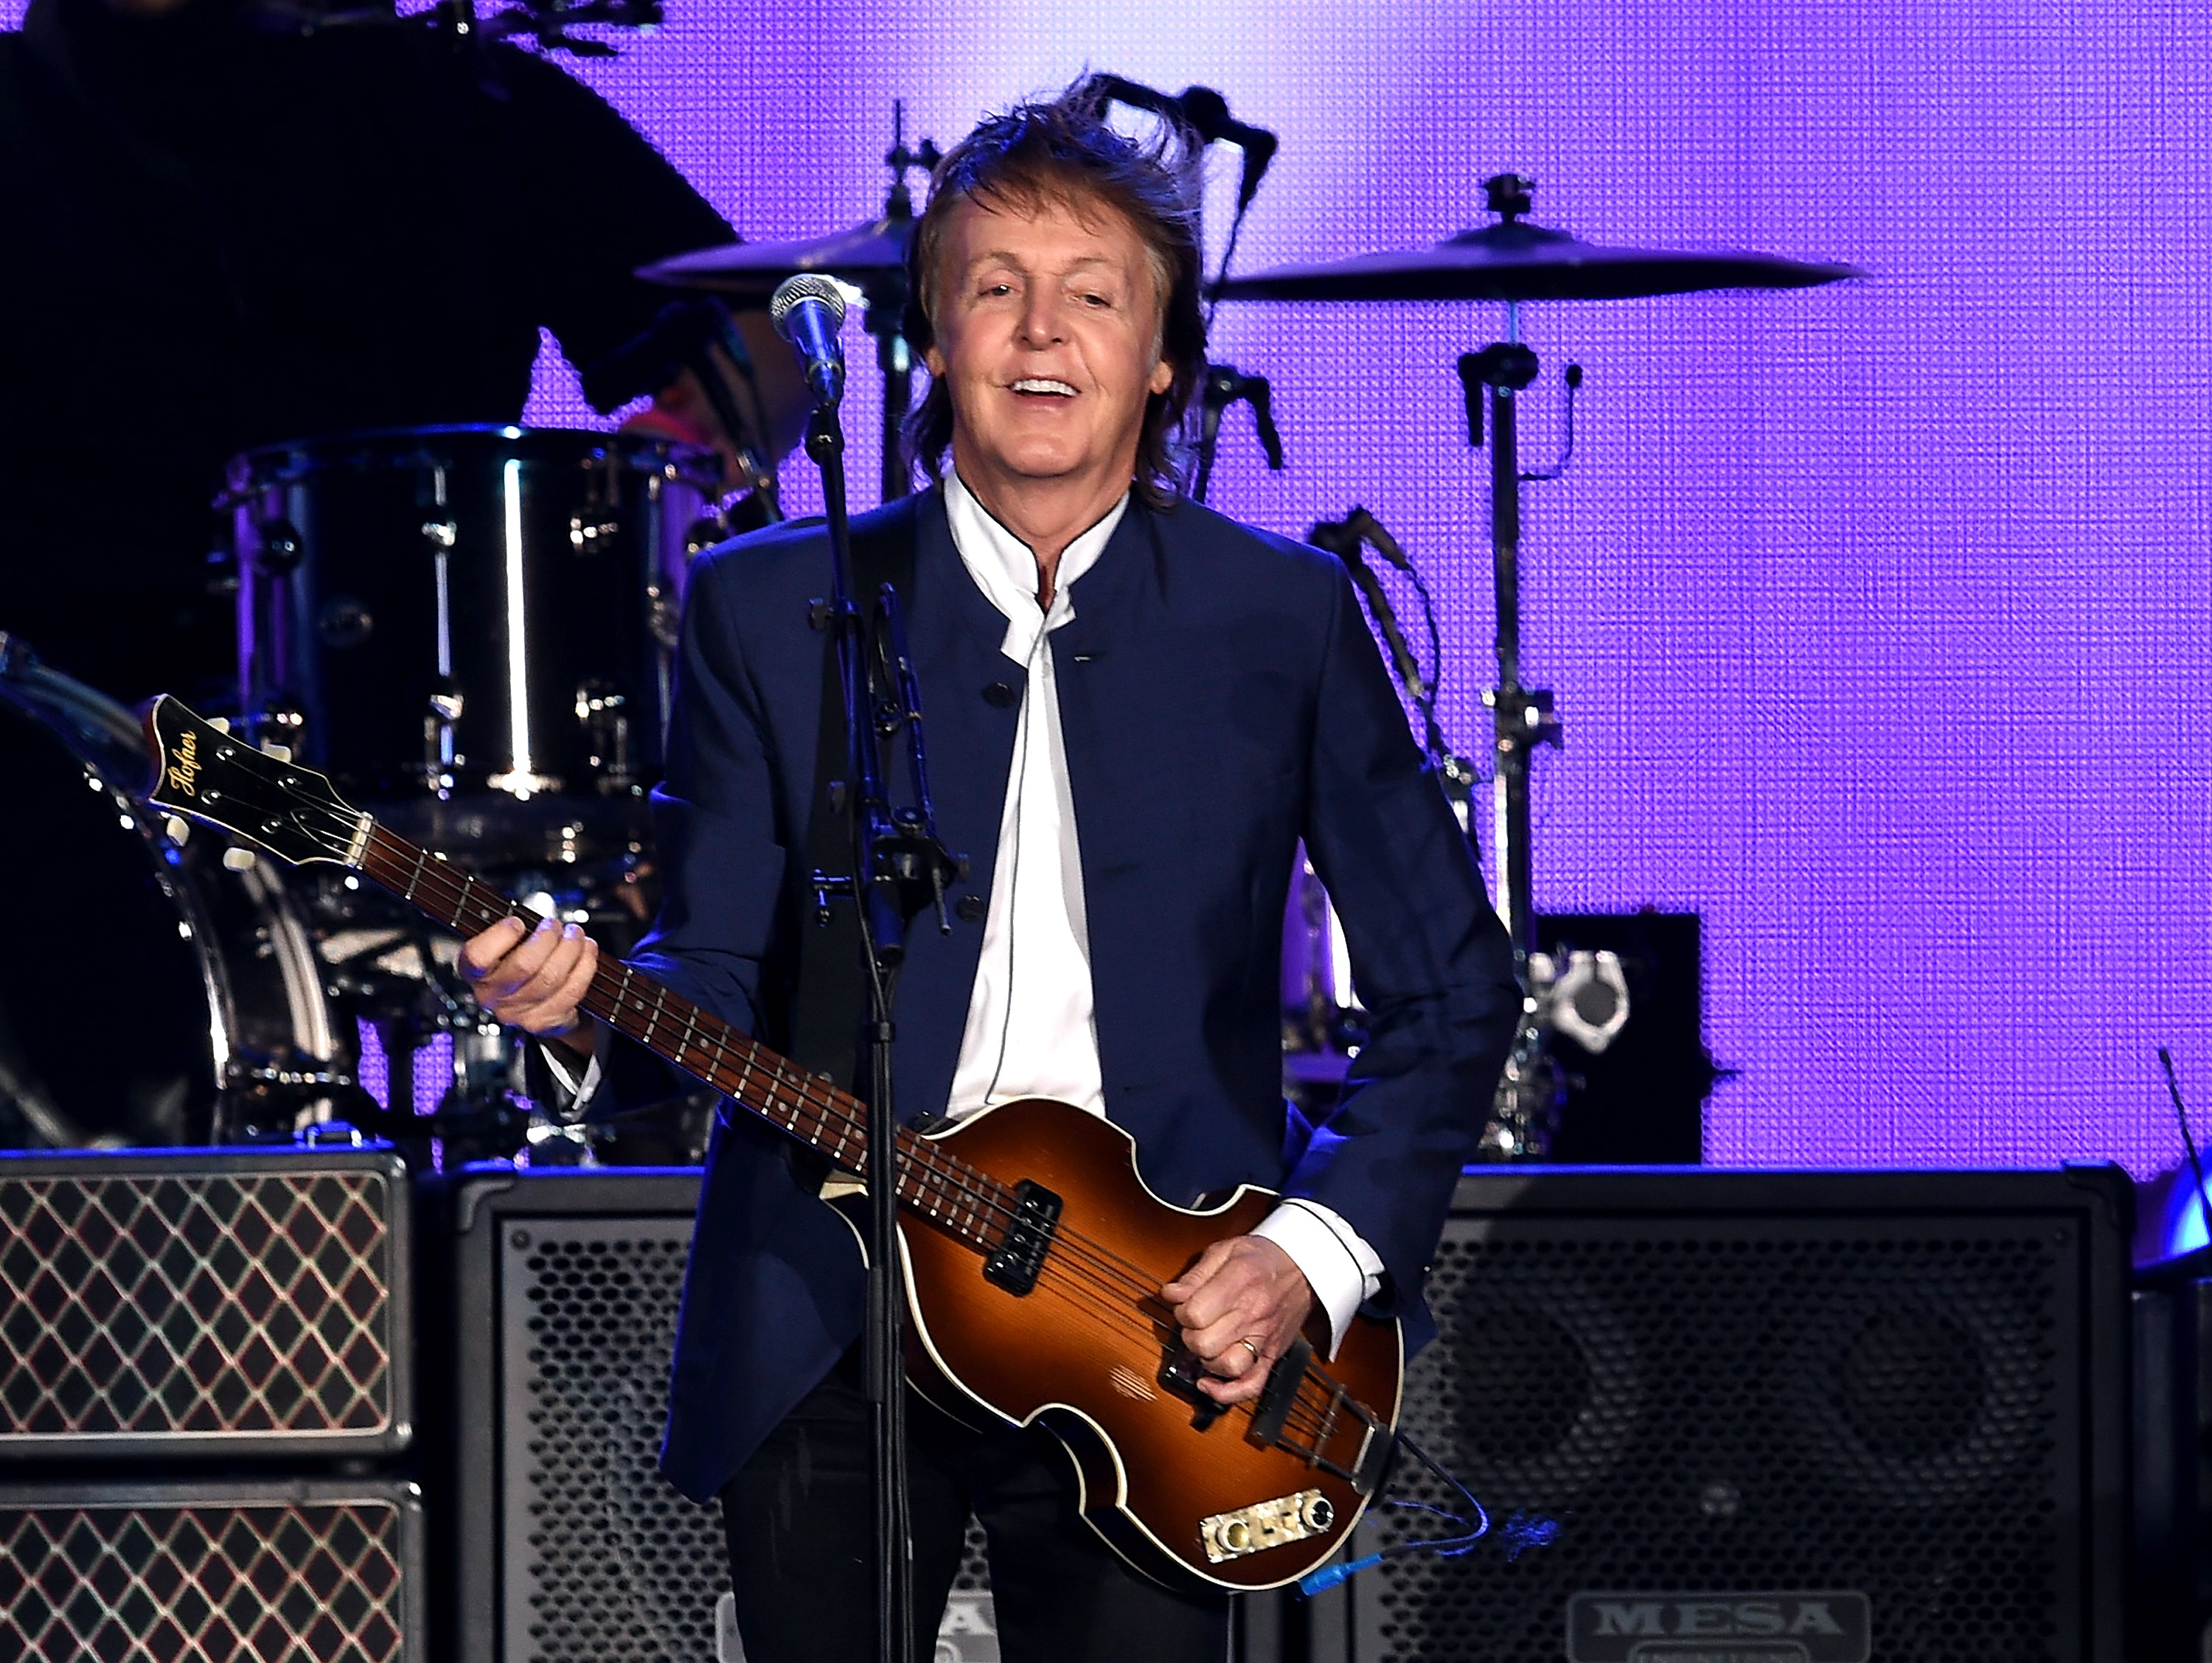 Paul McCartney in Indio, California on October 15, 2016 | Source: Getty Images